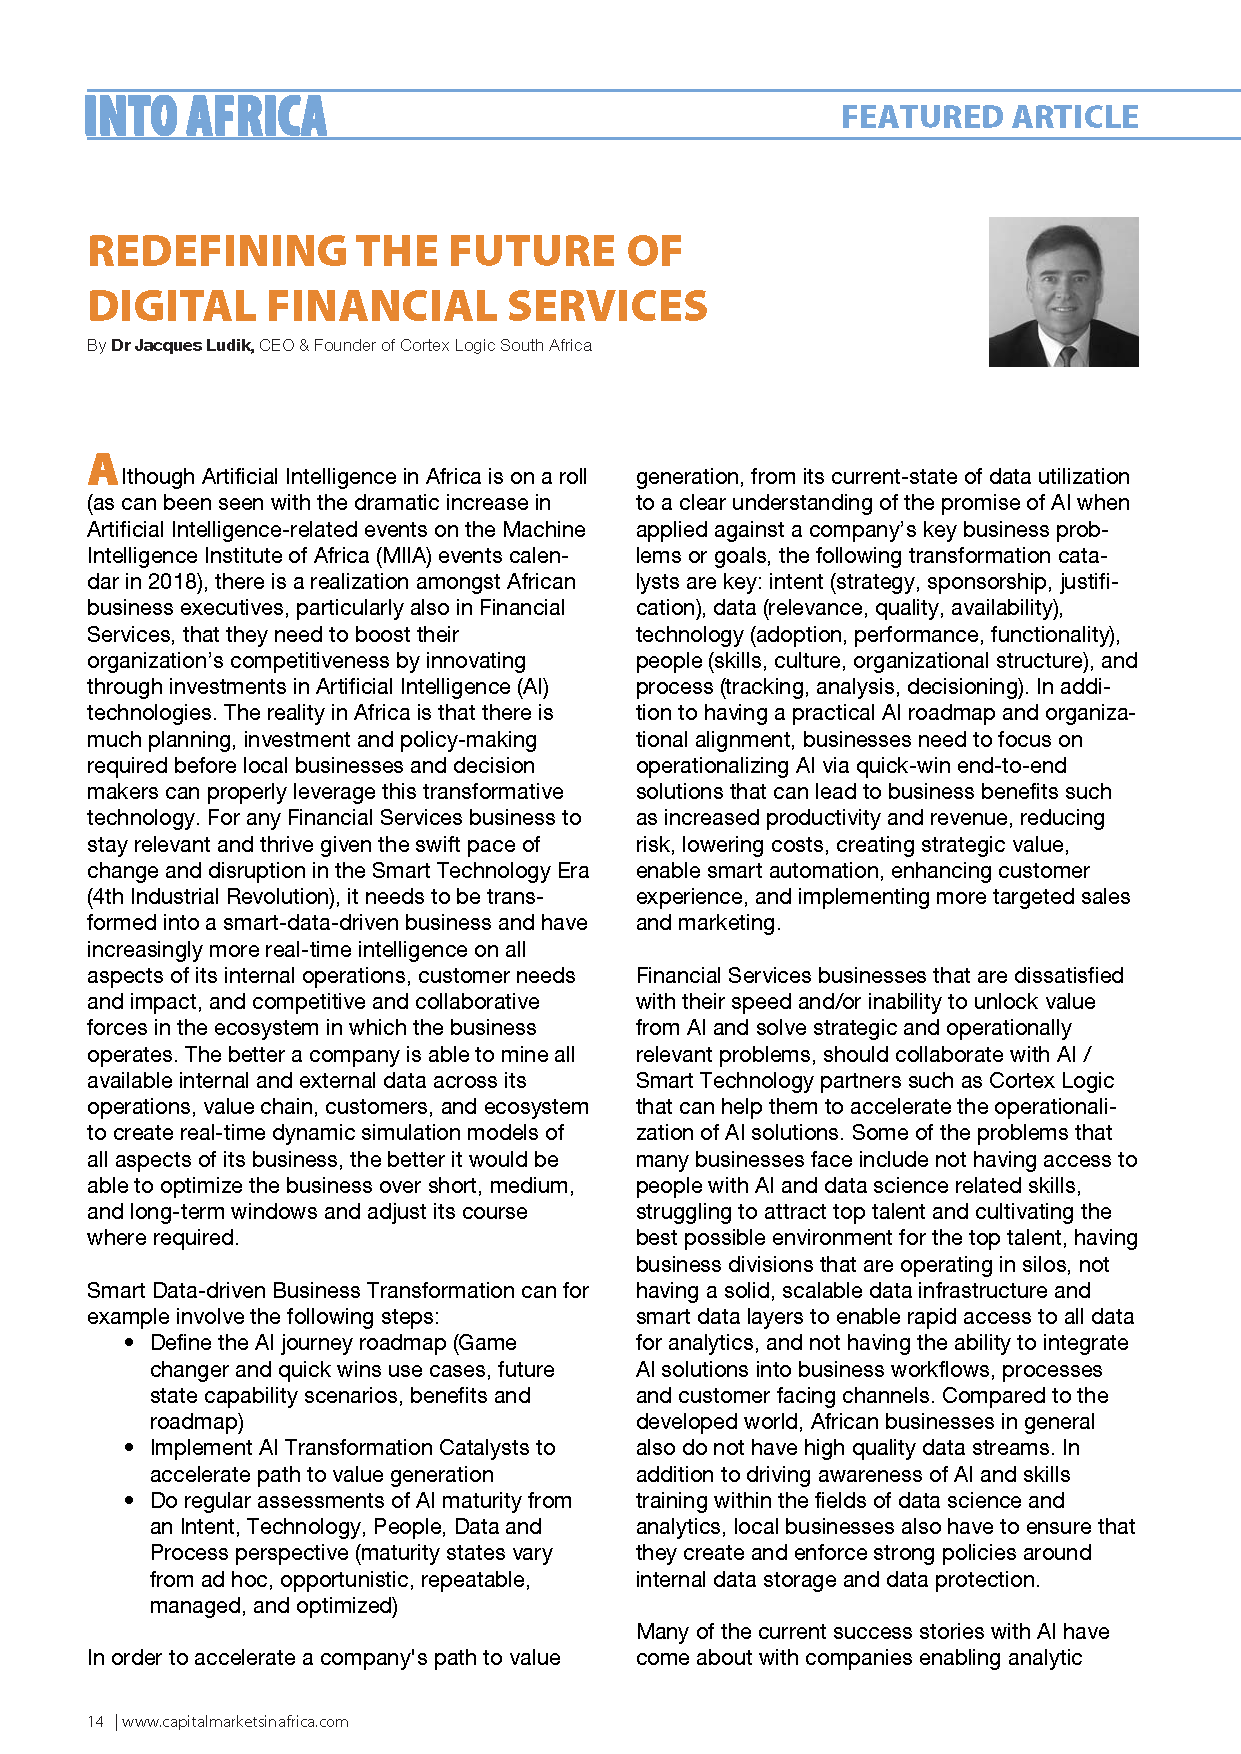 Redefining the Future of Digital Financial Services